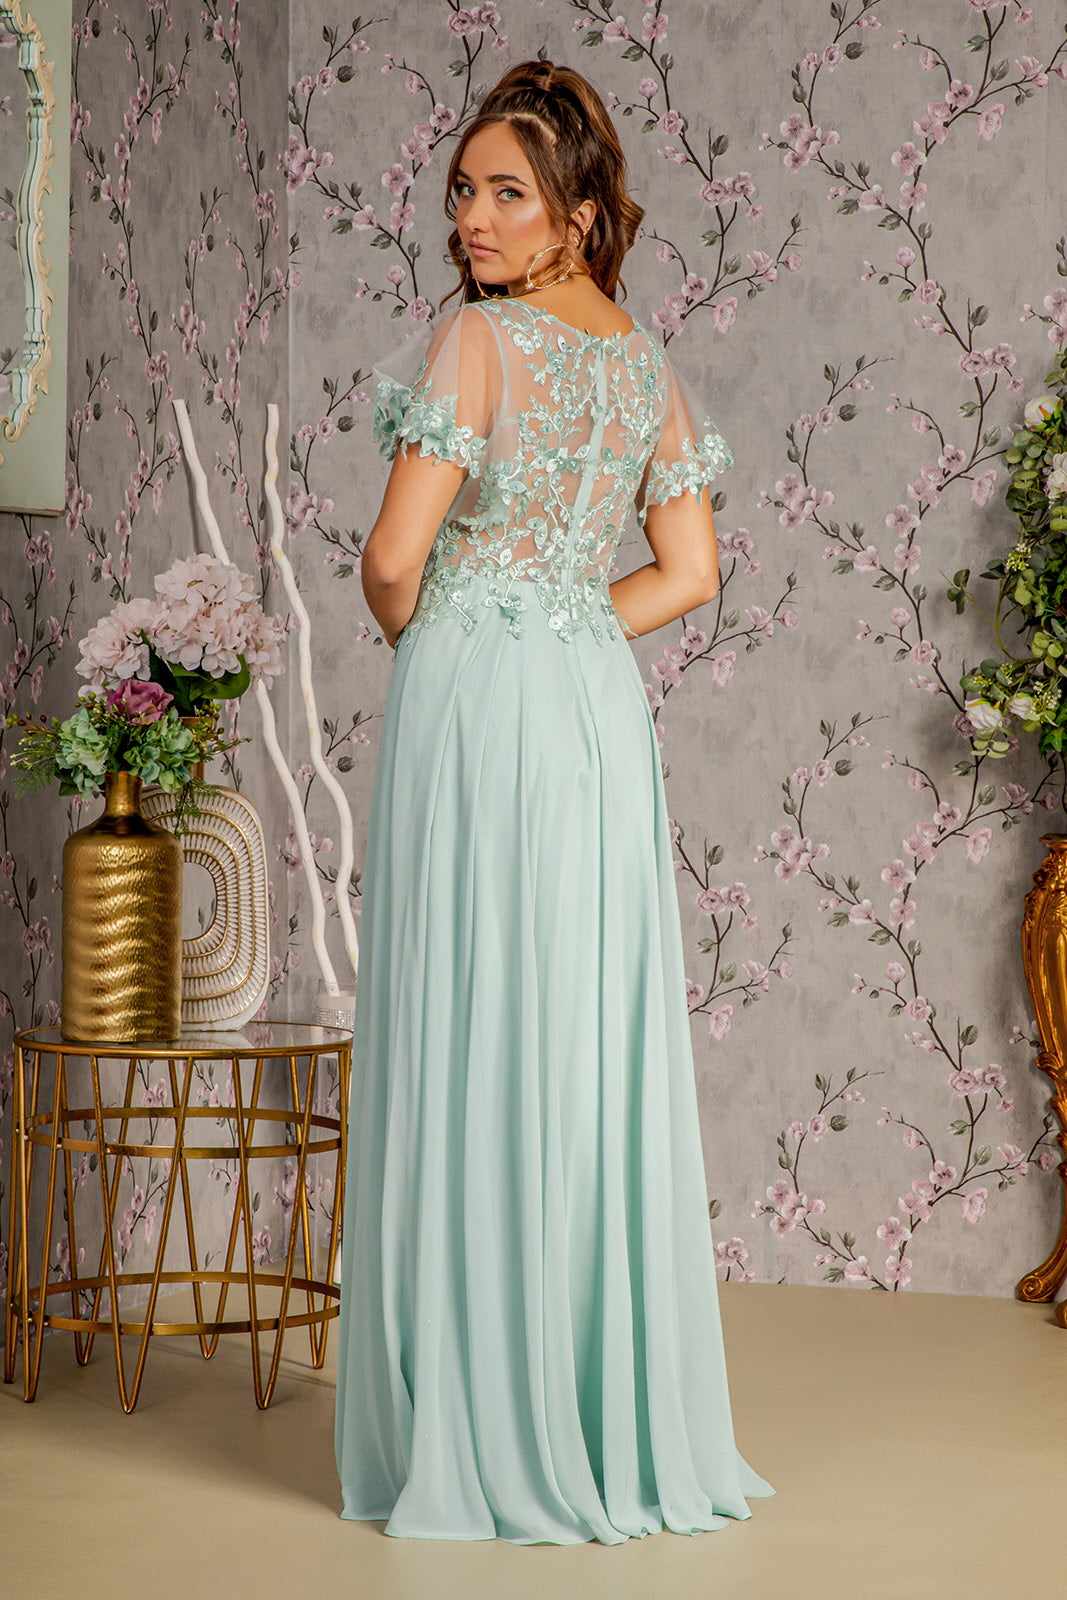 Floral Applique Short Sleeve A-line Gown by GLS Gloria GL3352